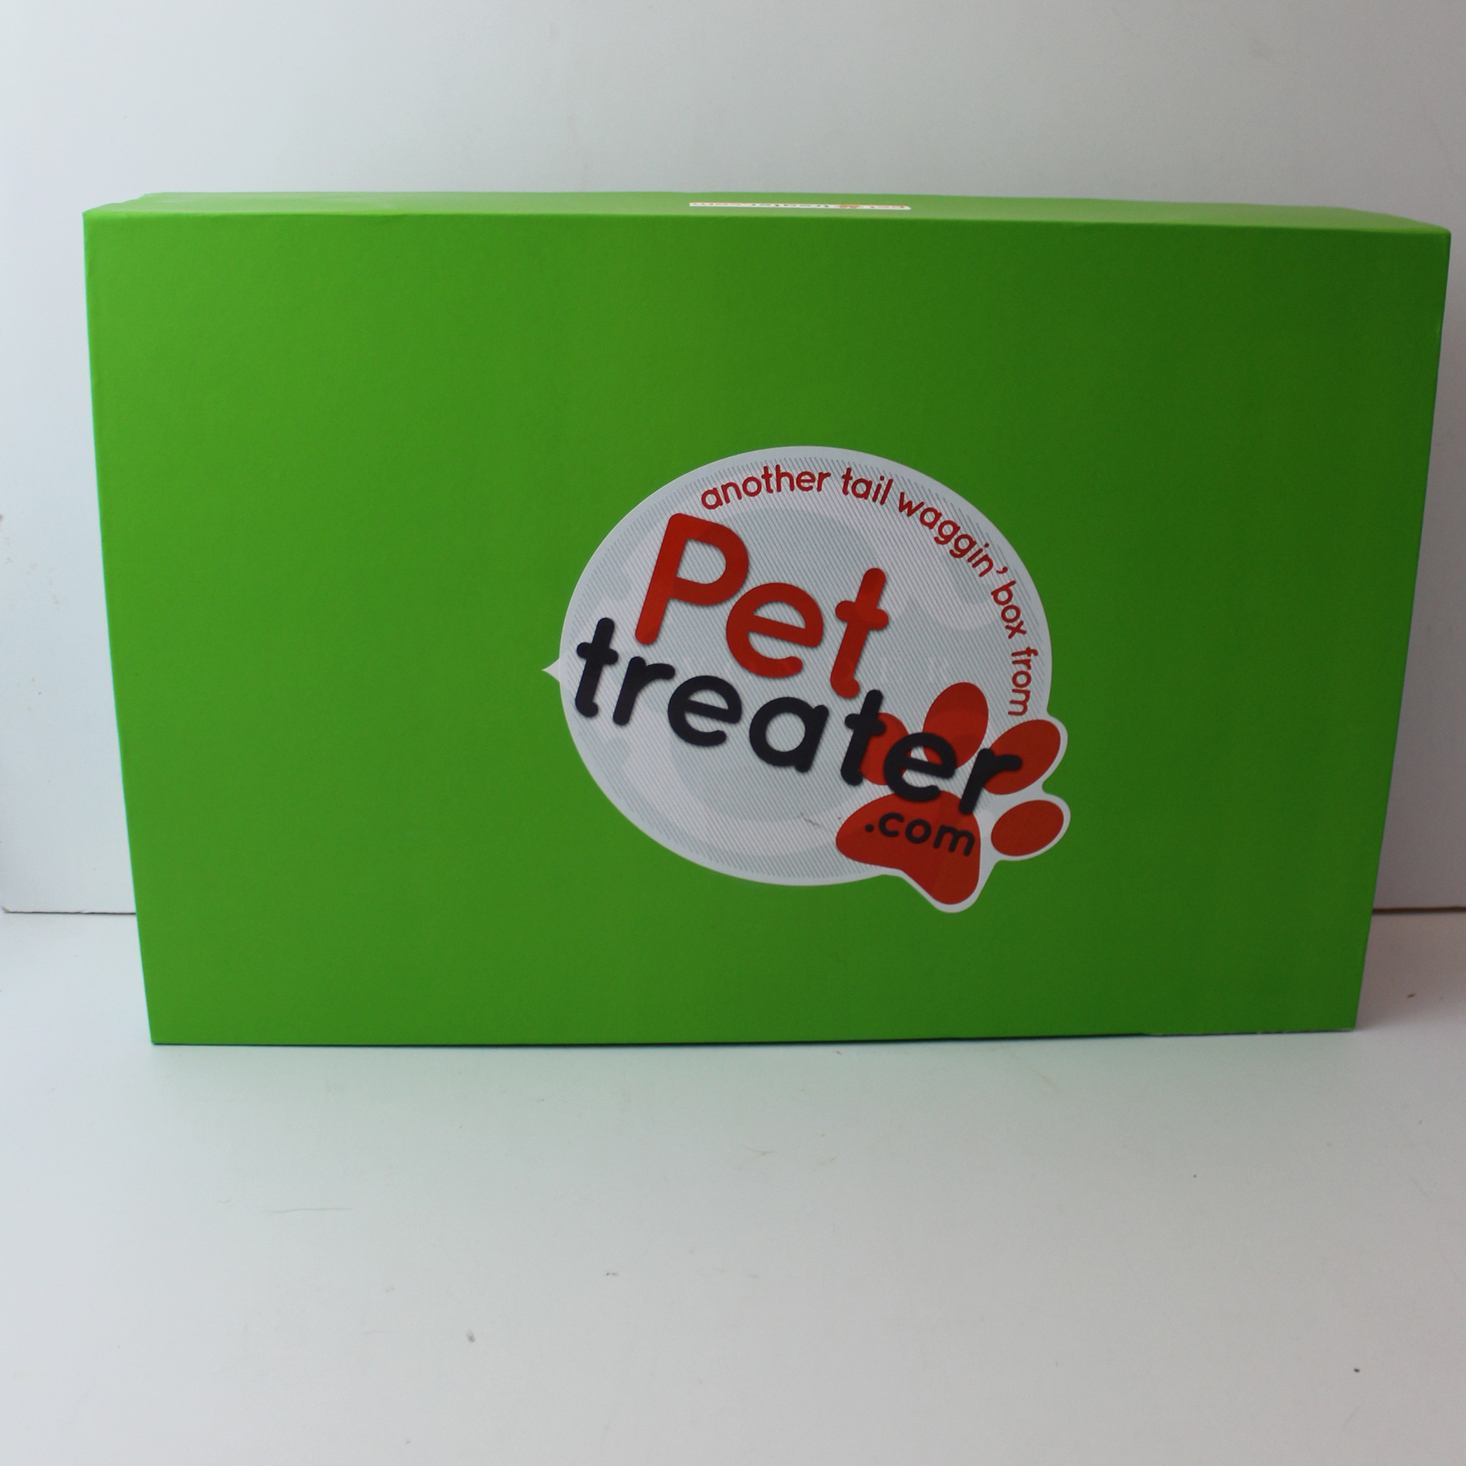 Pet Treater Dog Subscription Box Review + Coupon – January 2019